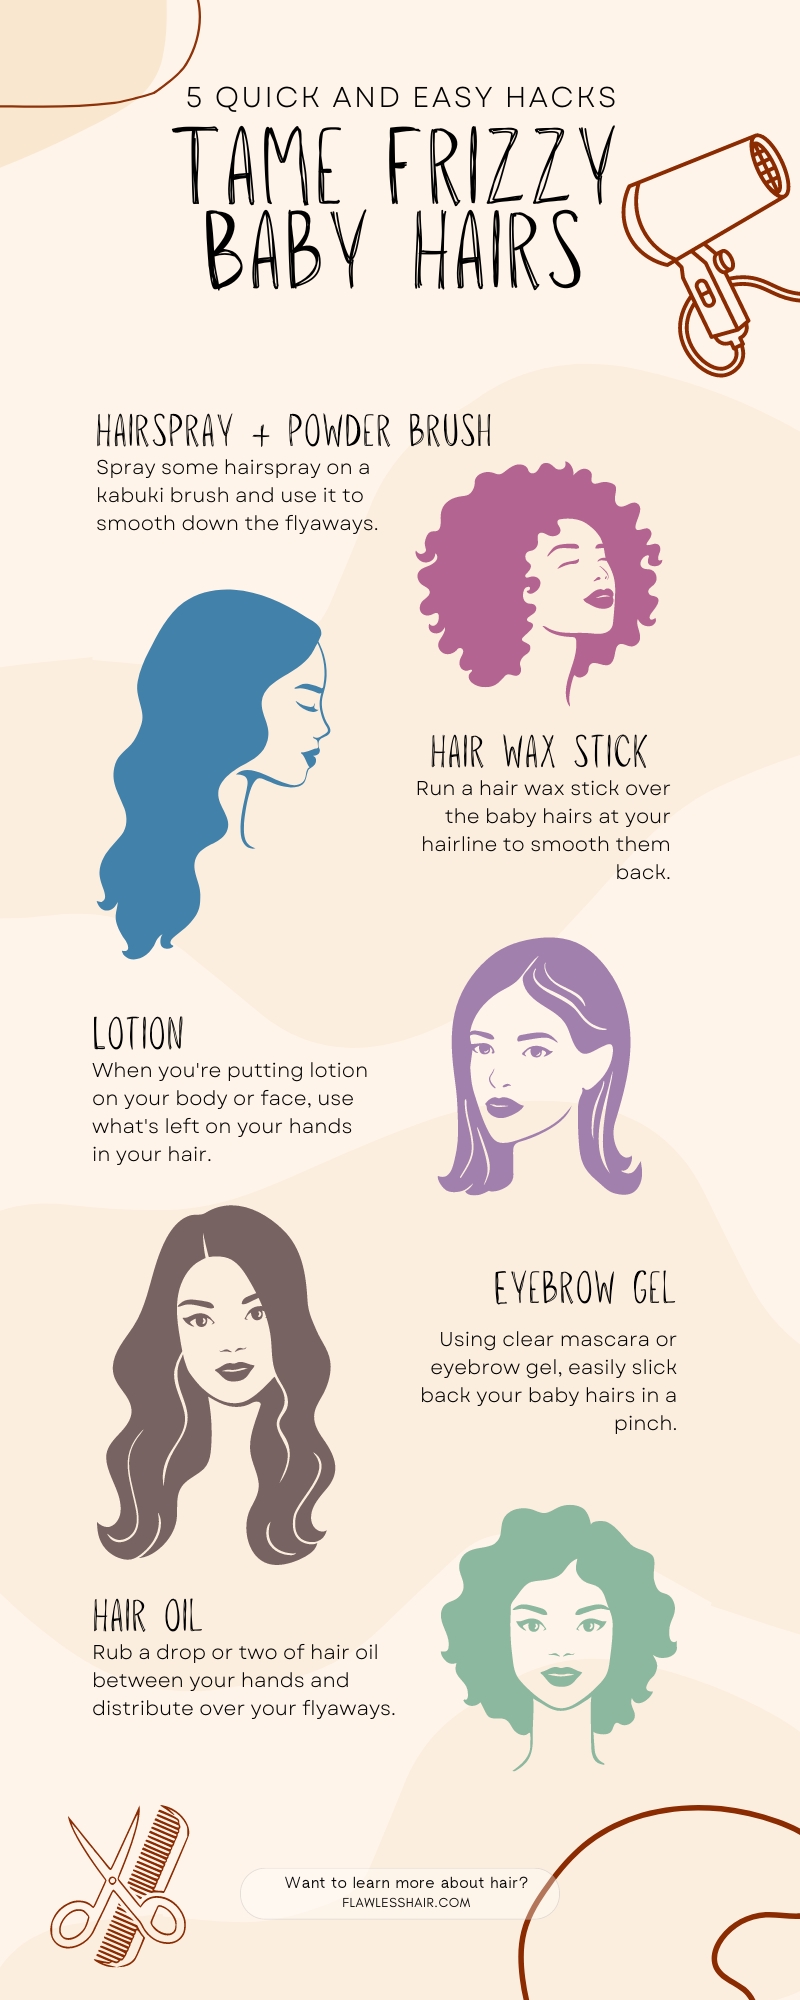 tame your baby hair infographic